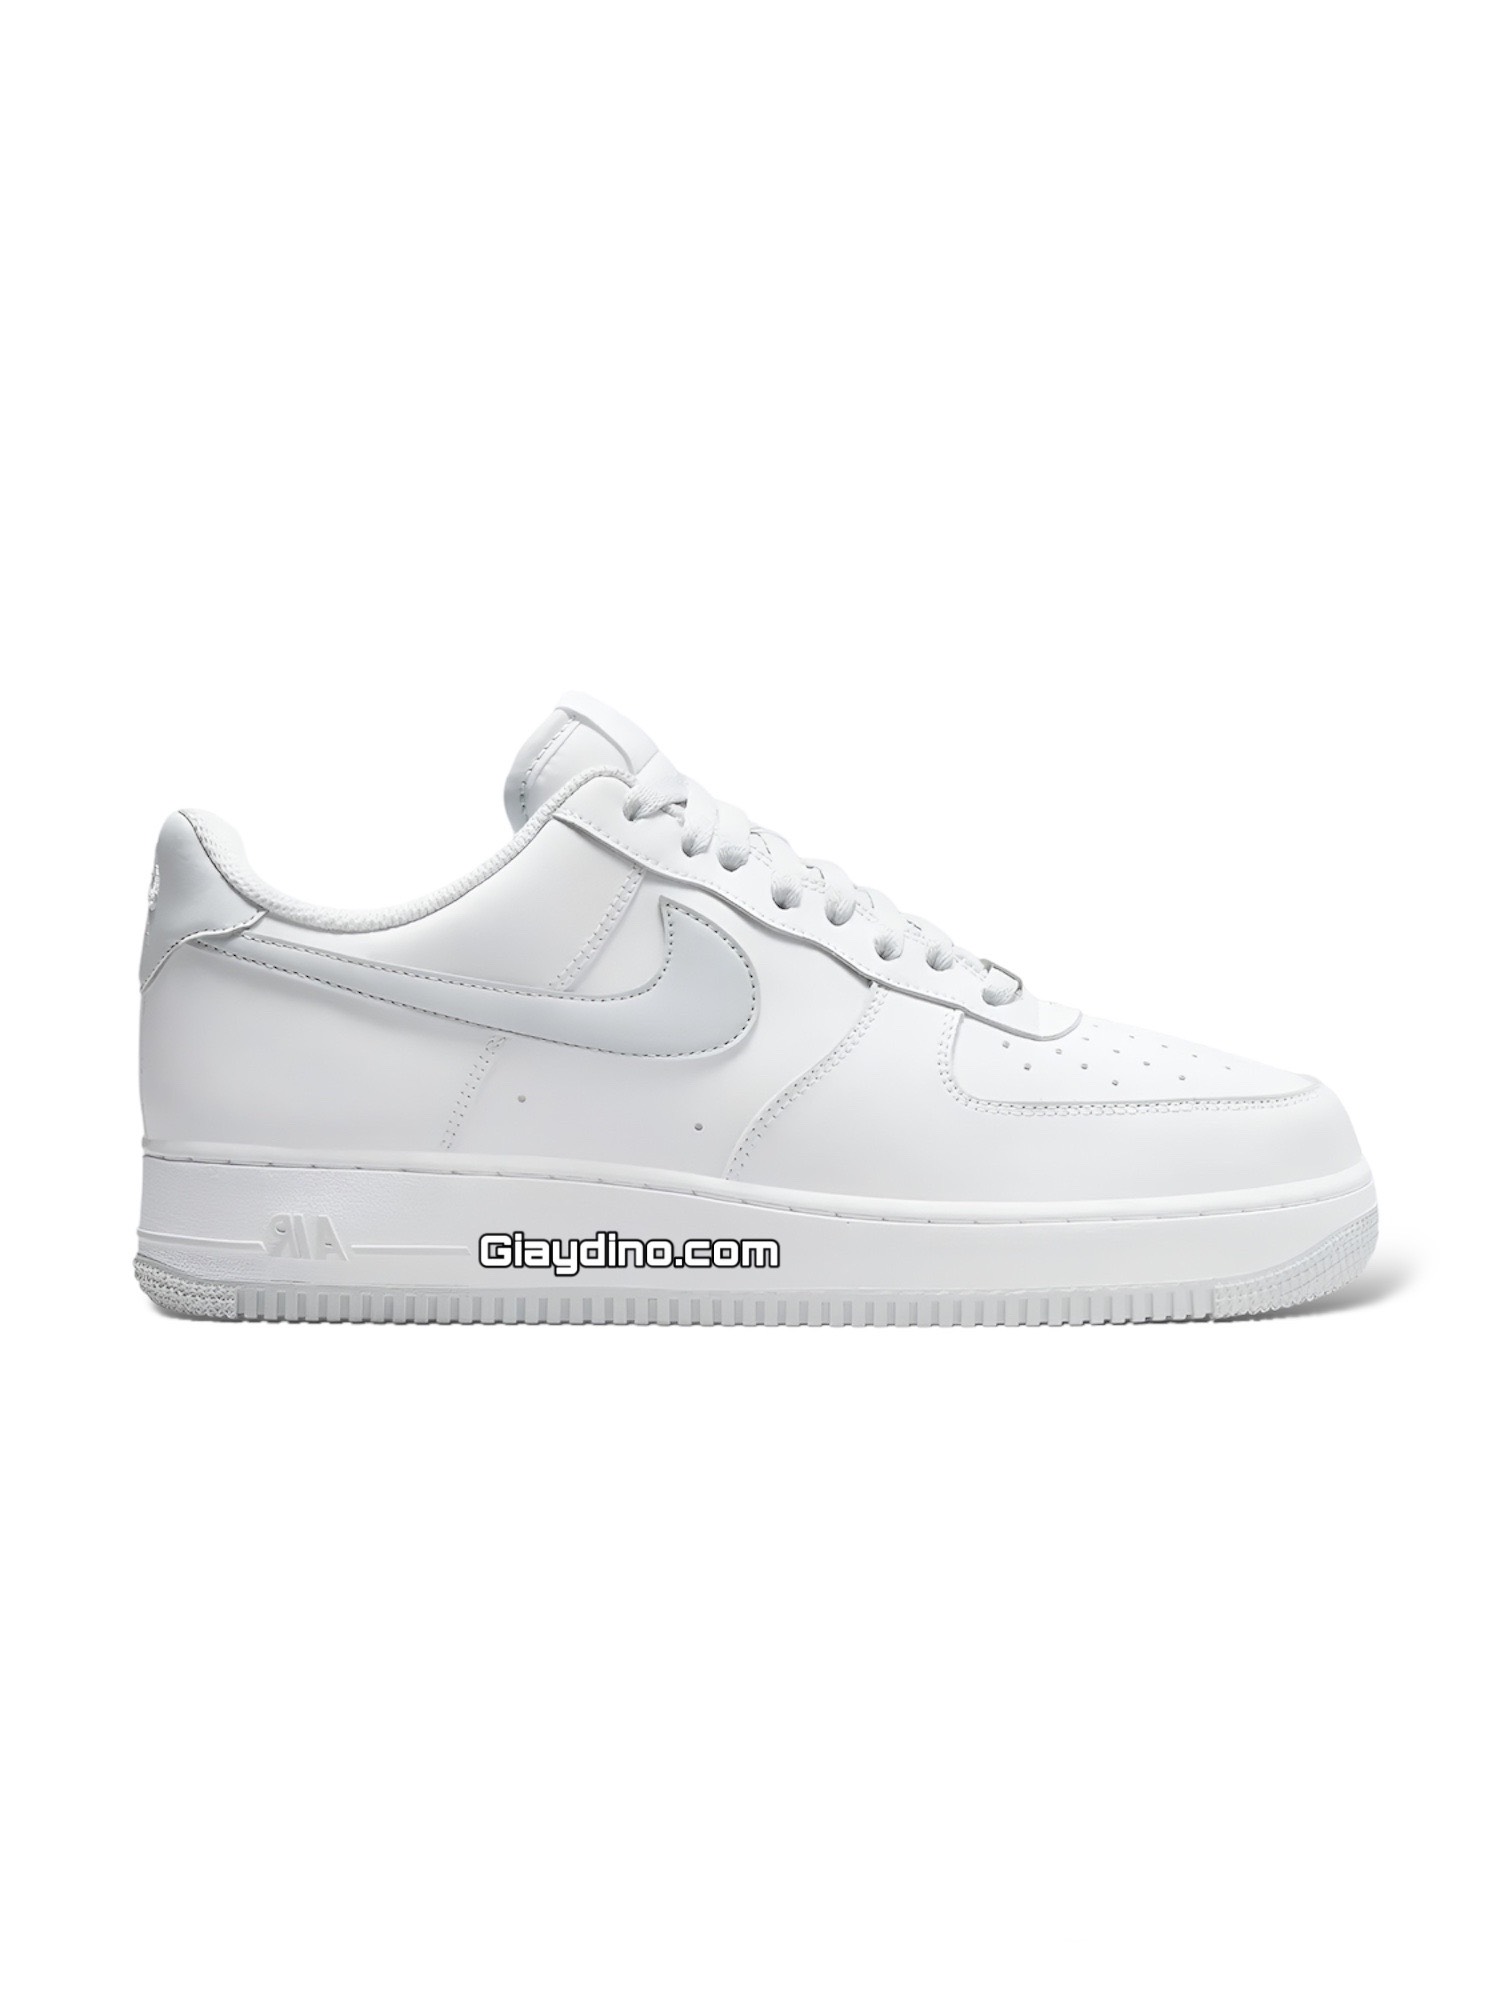 Giày Nike Air Force 1 Low 07 Pure Platinum DH7561-103